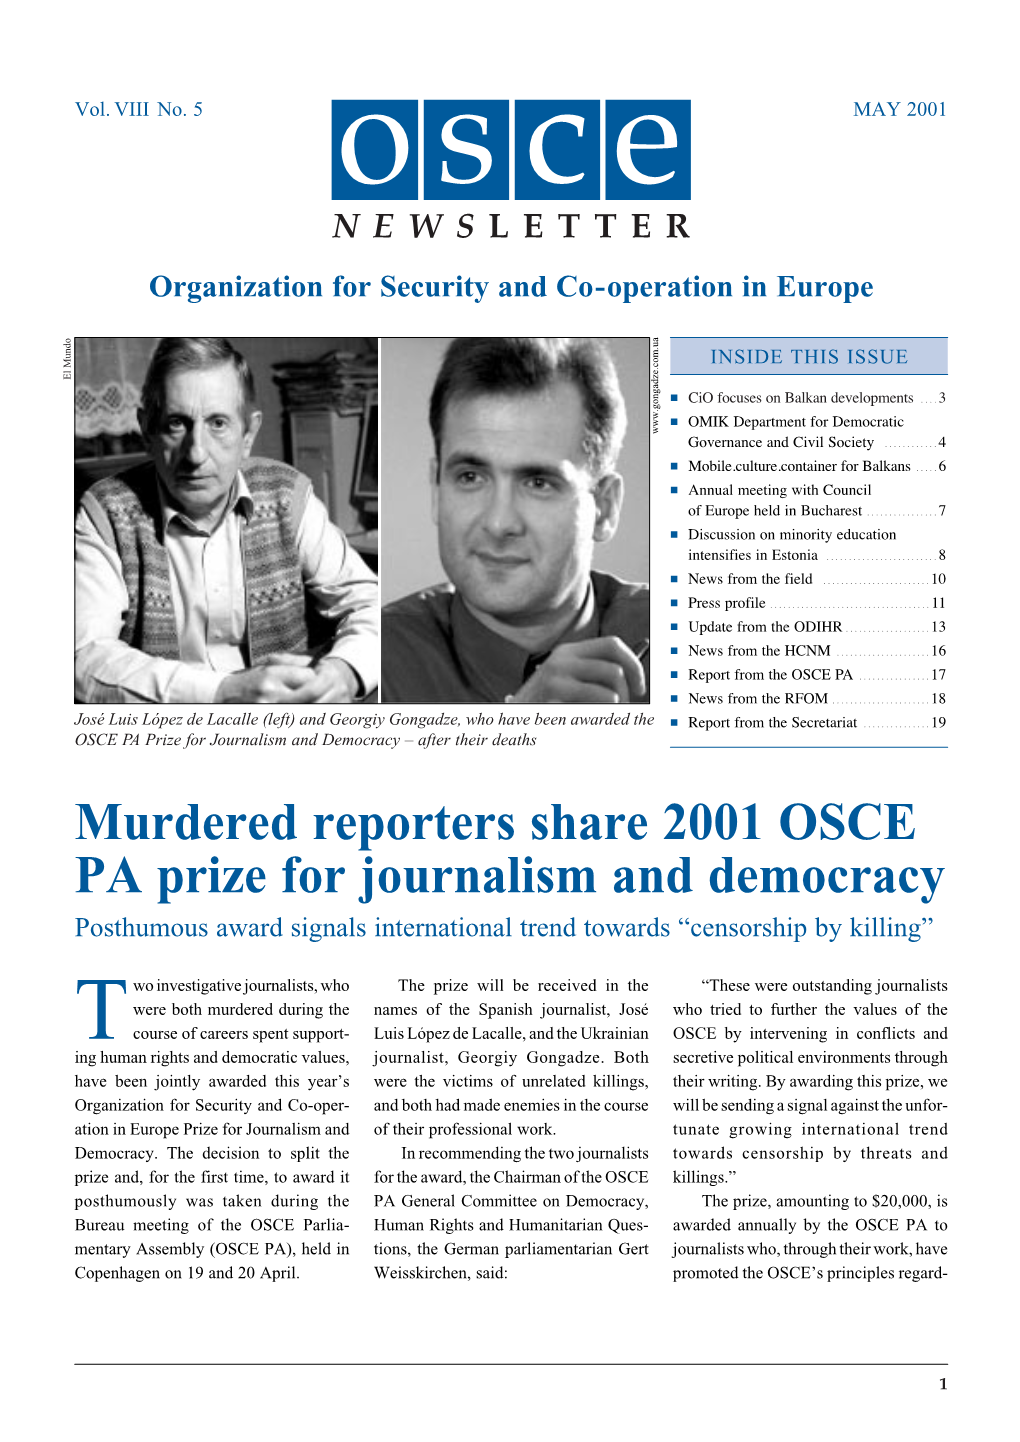 Murdered Reporters Share 2001 OSCE PA Prize for Journalism and Democracy Posthumous Award Signals International Trend Towards “Censorship by Killing”